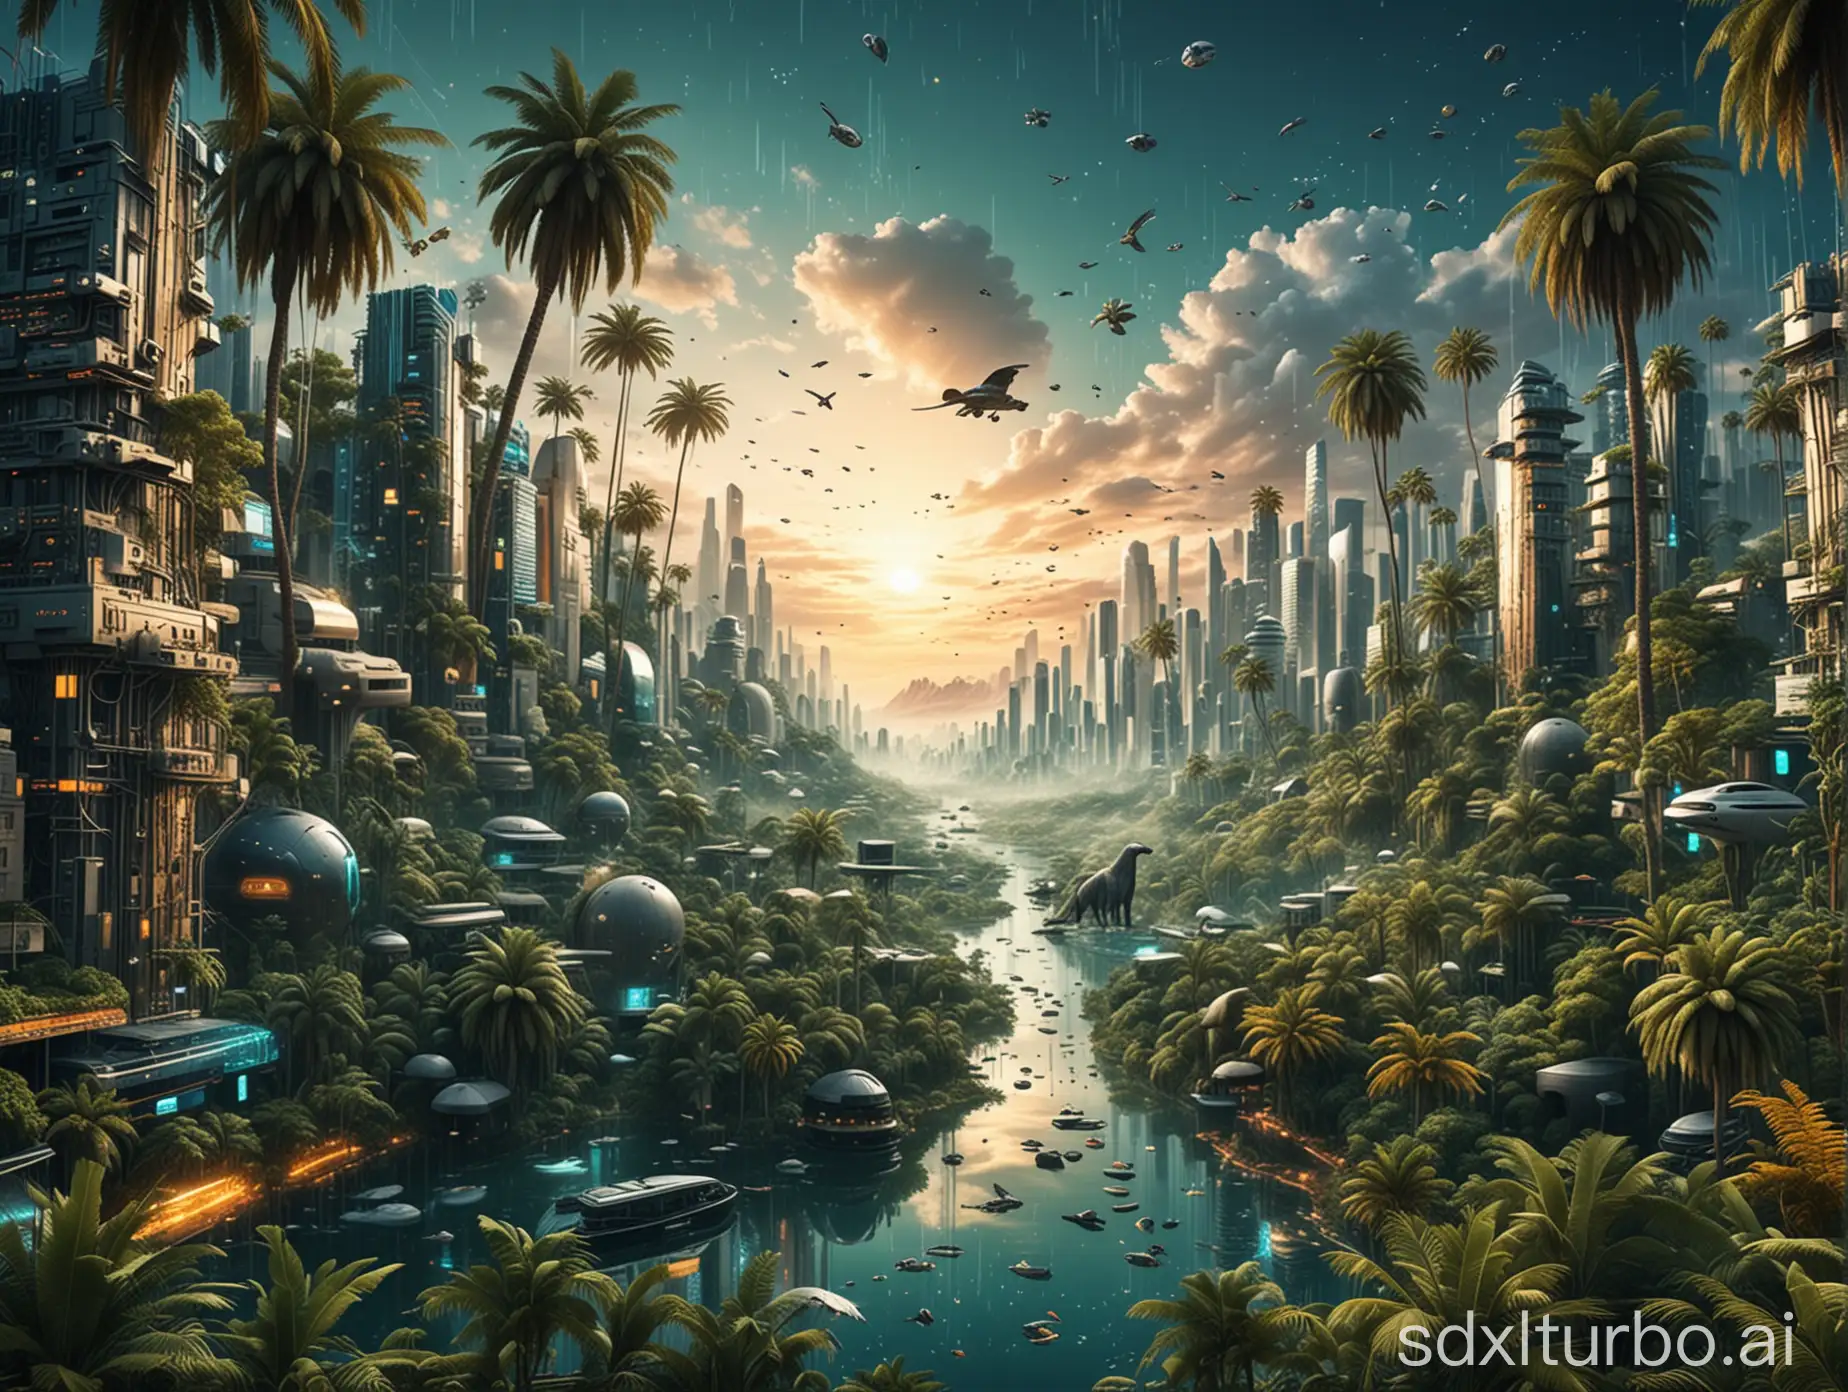 futuristic engineering background city of flowing data with artificial intelligence appliances, but the city is full of forest, palm trees and exotic animals